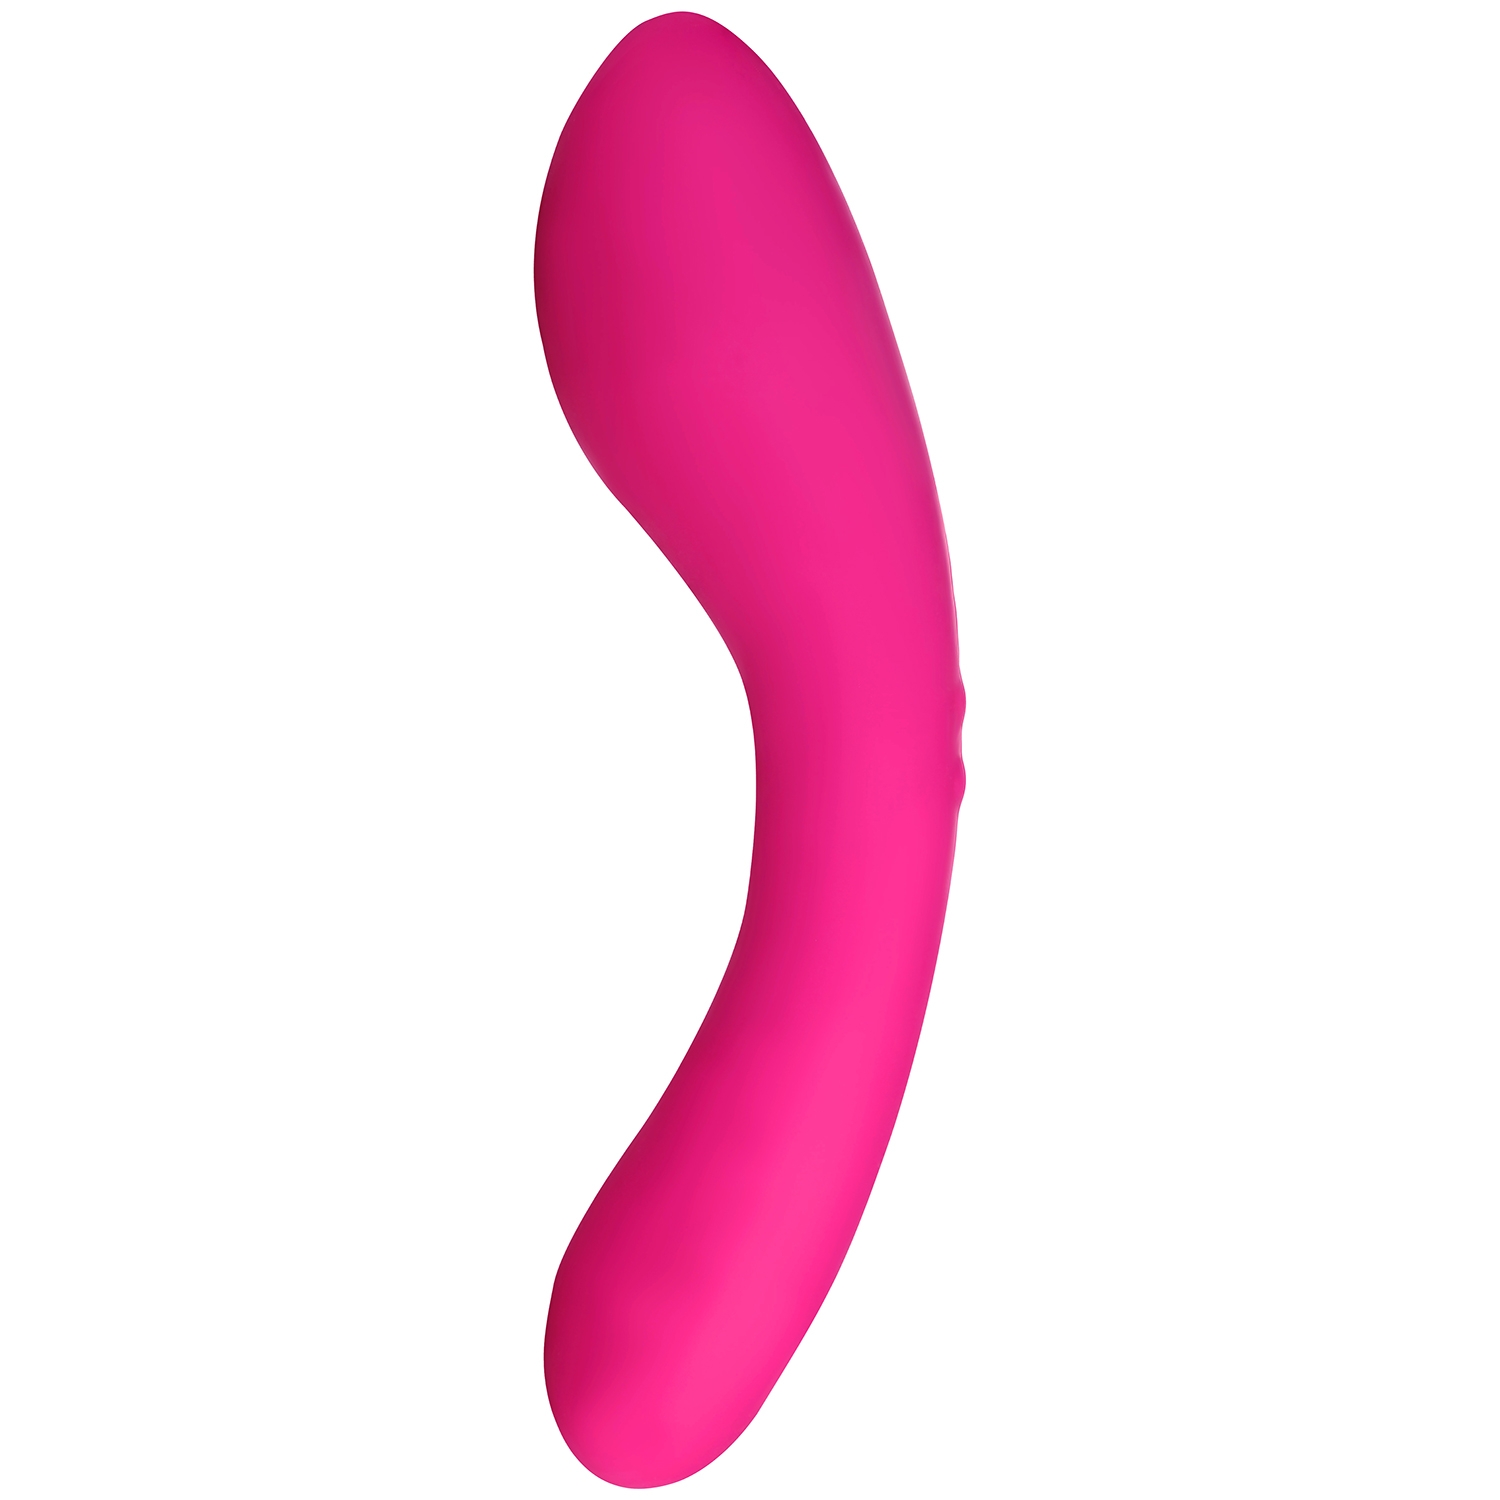 SWAN The Swan Wand Opladelig Vibrator - Rose